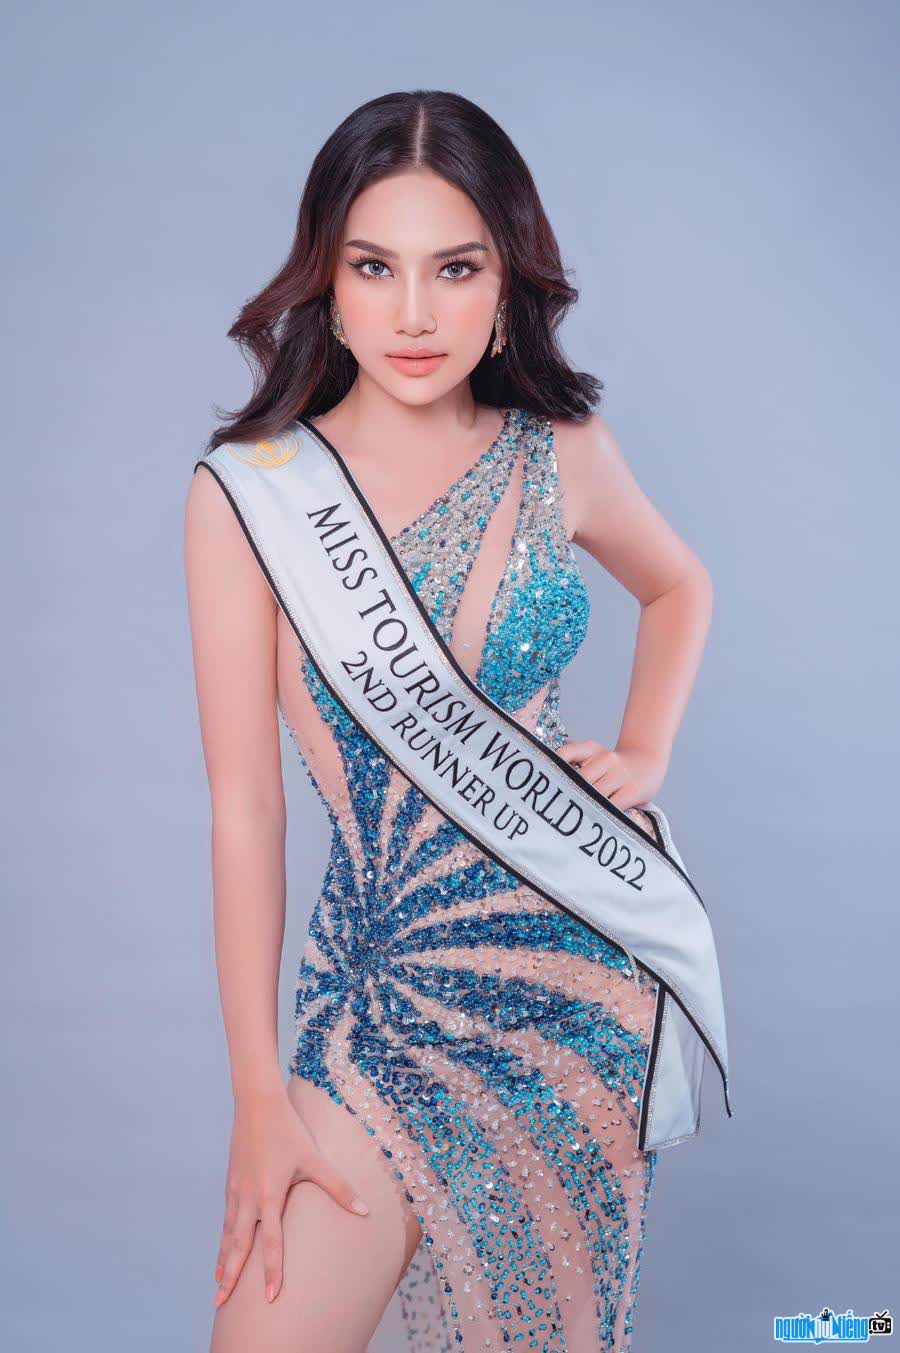 Le Thi Huong Ly is 2nd runner-up of Miss Tourism World 2022